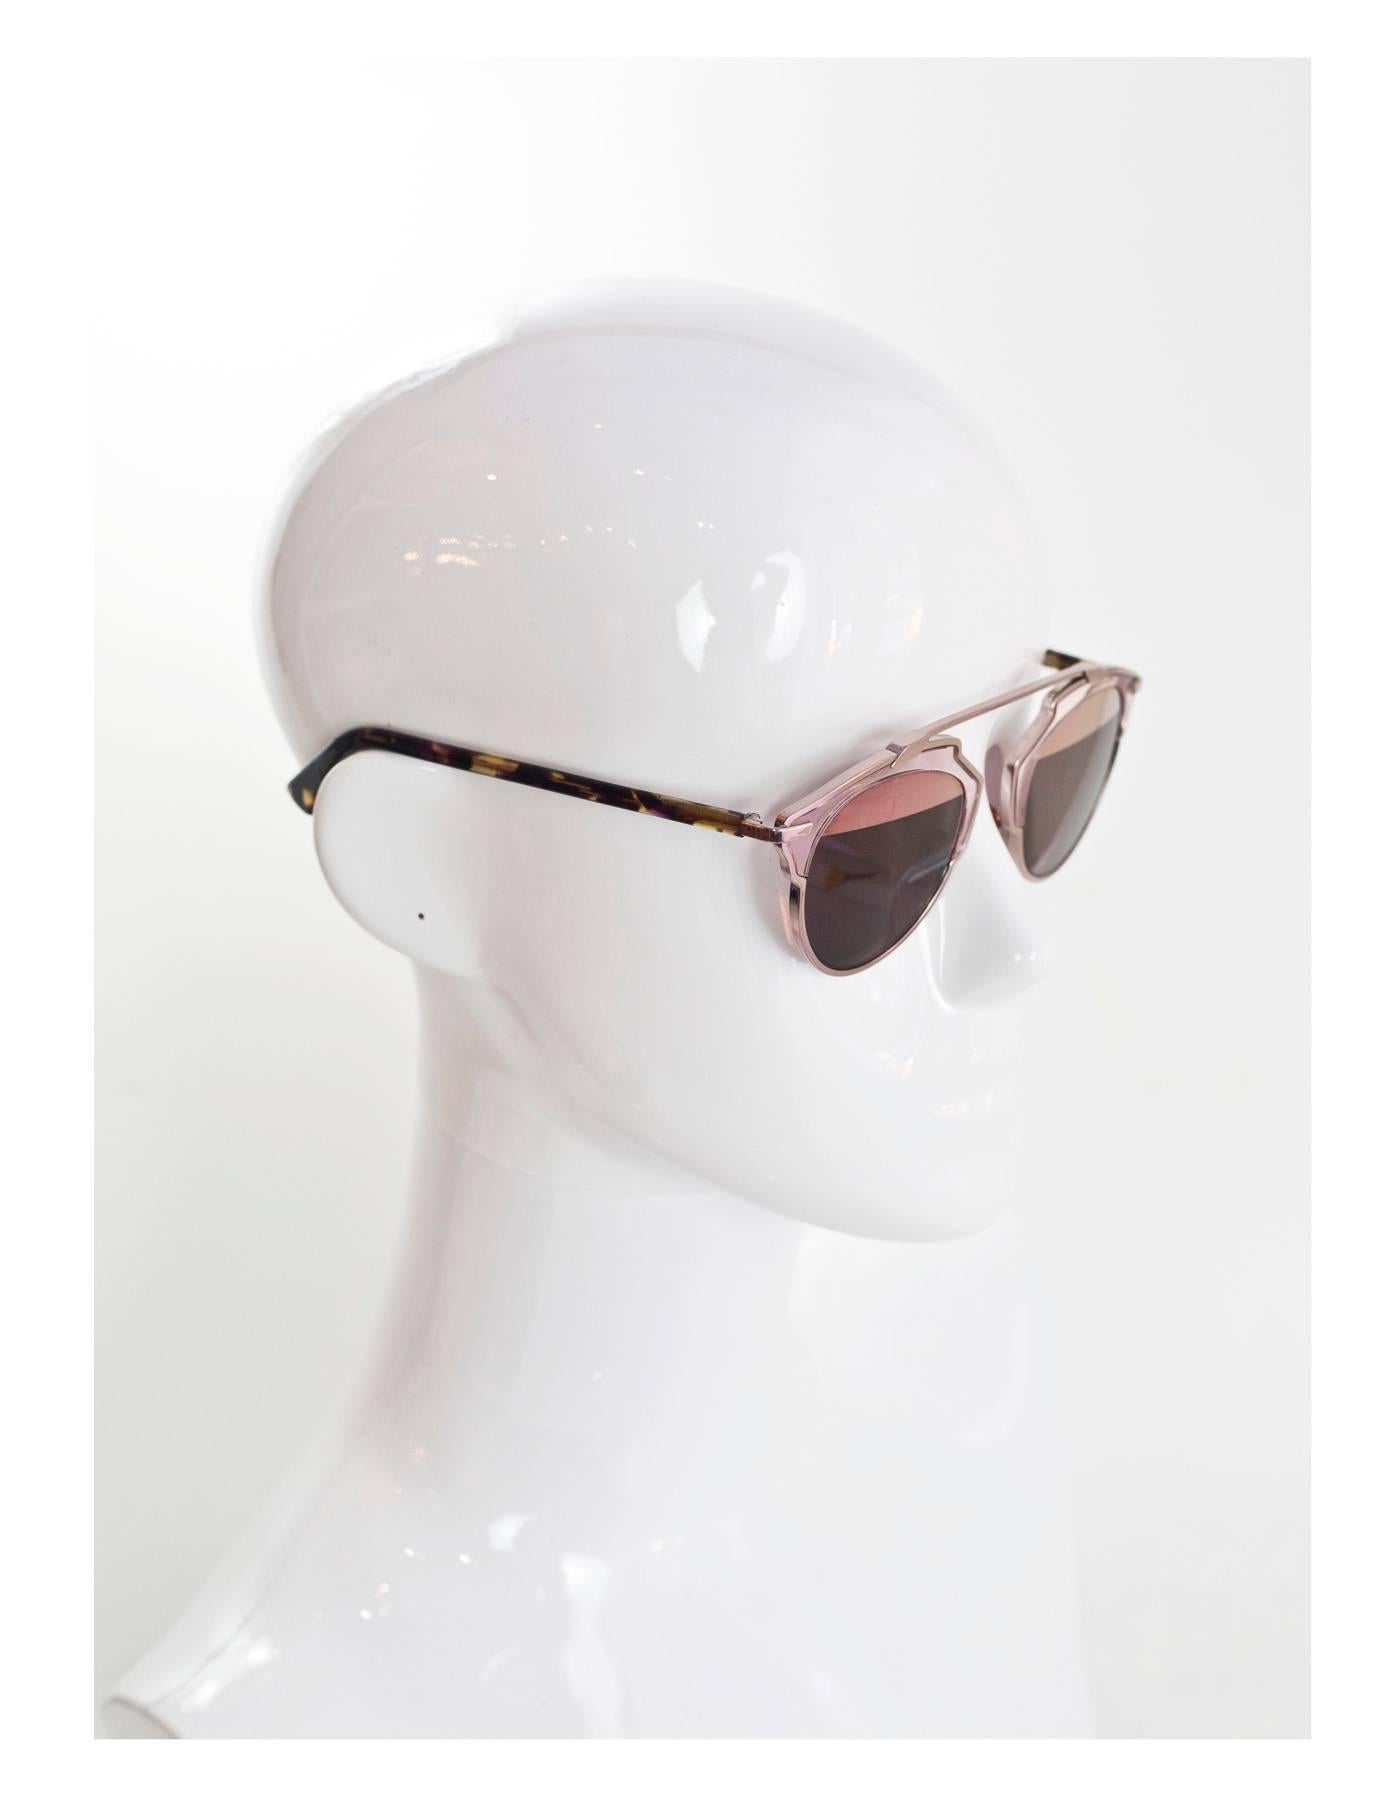 Christian Dior Rose Gold So Real Sunglasses

Made In: Italy
Color: Rose gold, tortoise
Materials: Metal, resin
Retail Price: $495 + tax
Overall Condition: Very good pre-owned condition with the exception of light scratching at lenses
Includes: